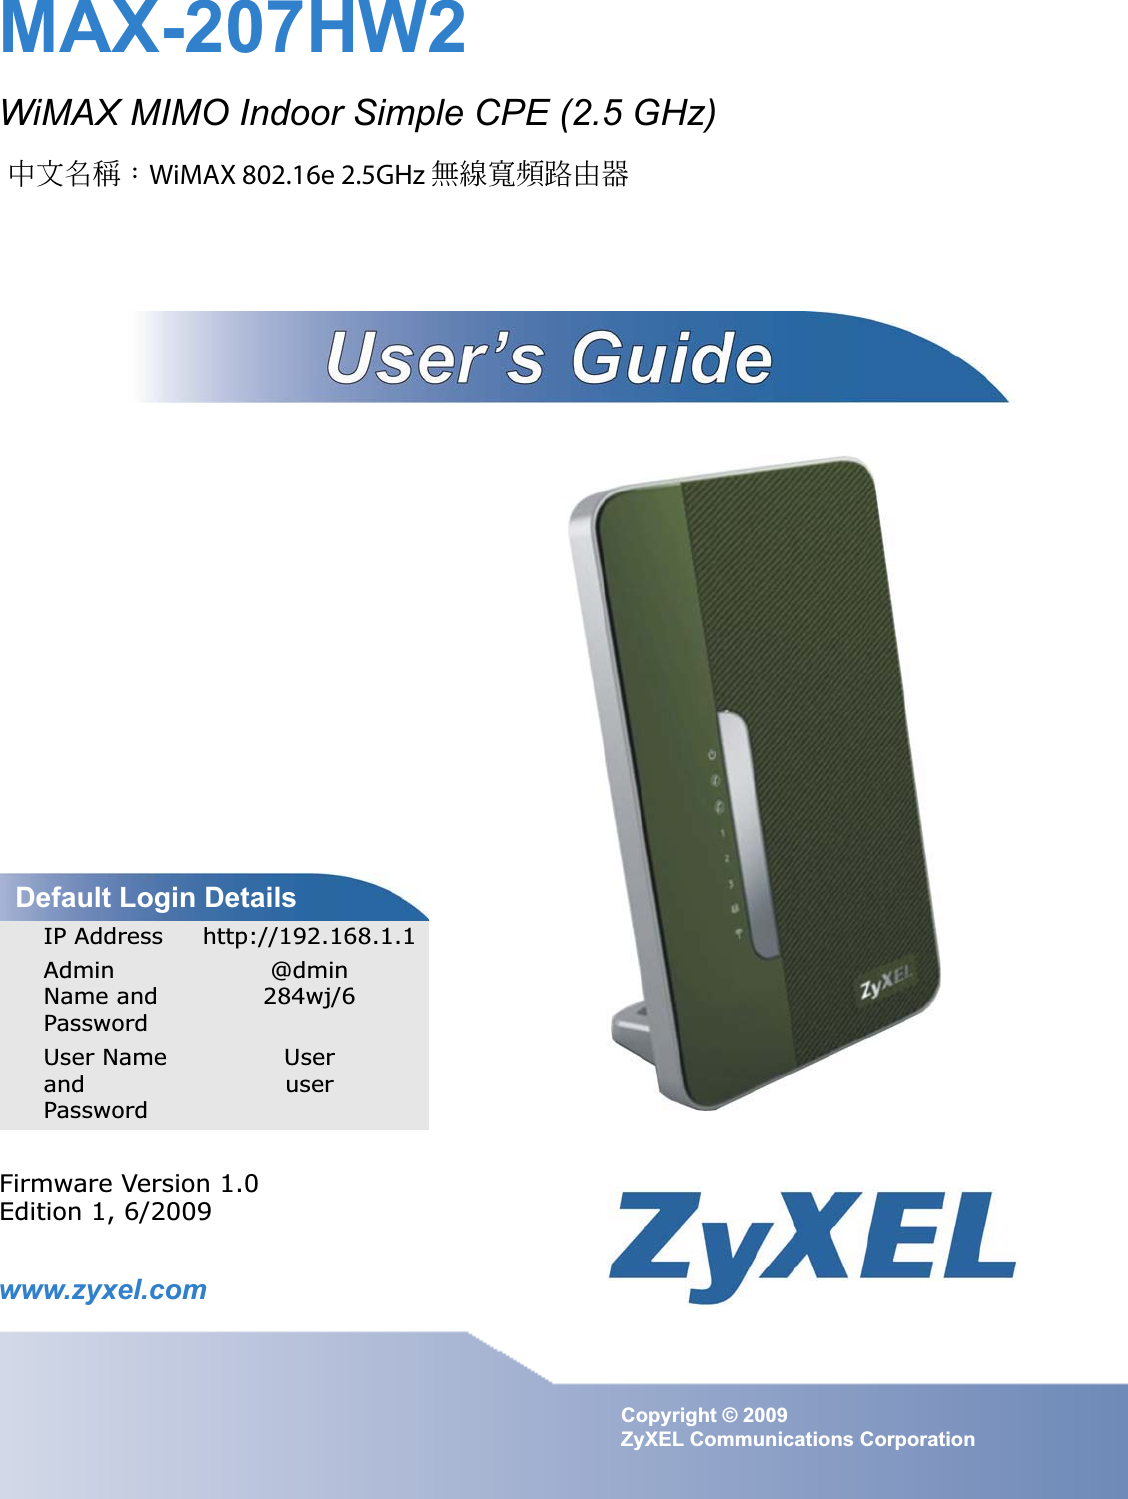 www.zyxel.comwww.zyxel.comMAX-207HW2WiMAX MIMO Indoor Simple CPE (2.5 GHz)Copyright © 2009 ZyXEL Communications CorporationFirmware Version 1.0Edition 1, 6/2009Default Login DetailsIP Address http://192.168.1.1AdminName and Password@dmin284wj/6User Name andPasswordUseruser中文名稱：WiMAX 802.16e 2.5GHz 無線寬頻路由器 